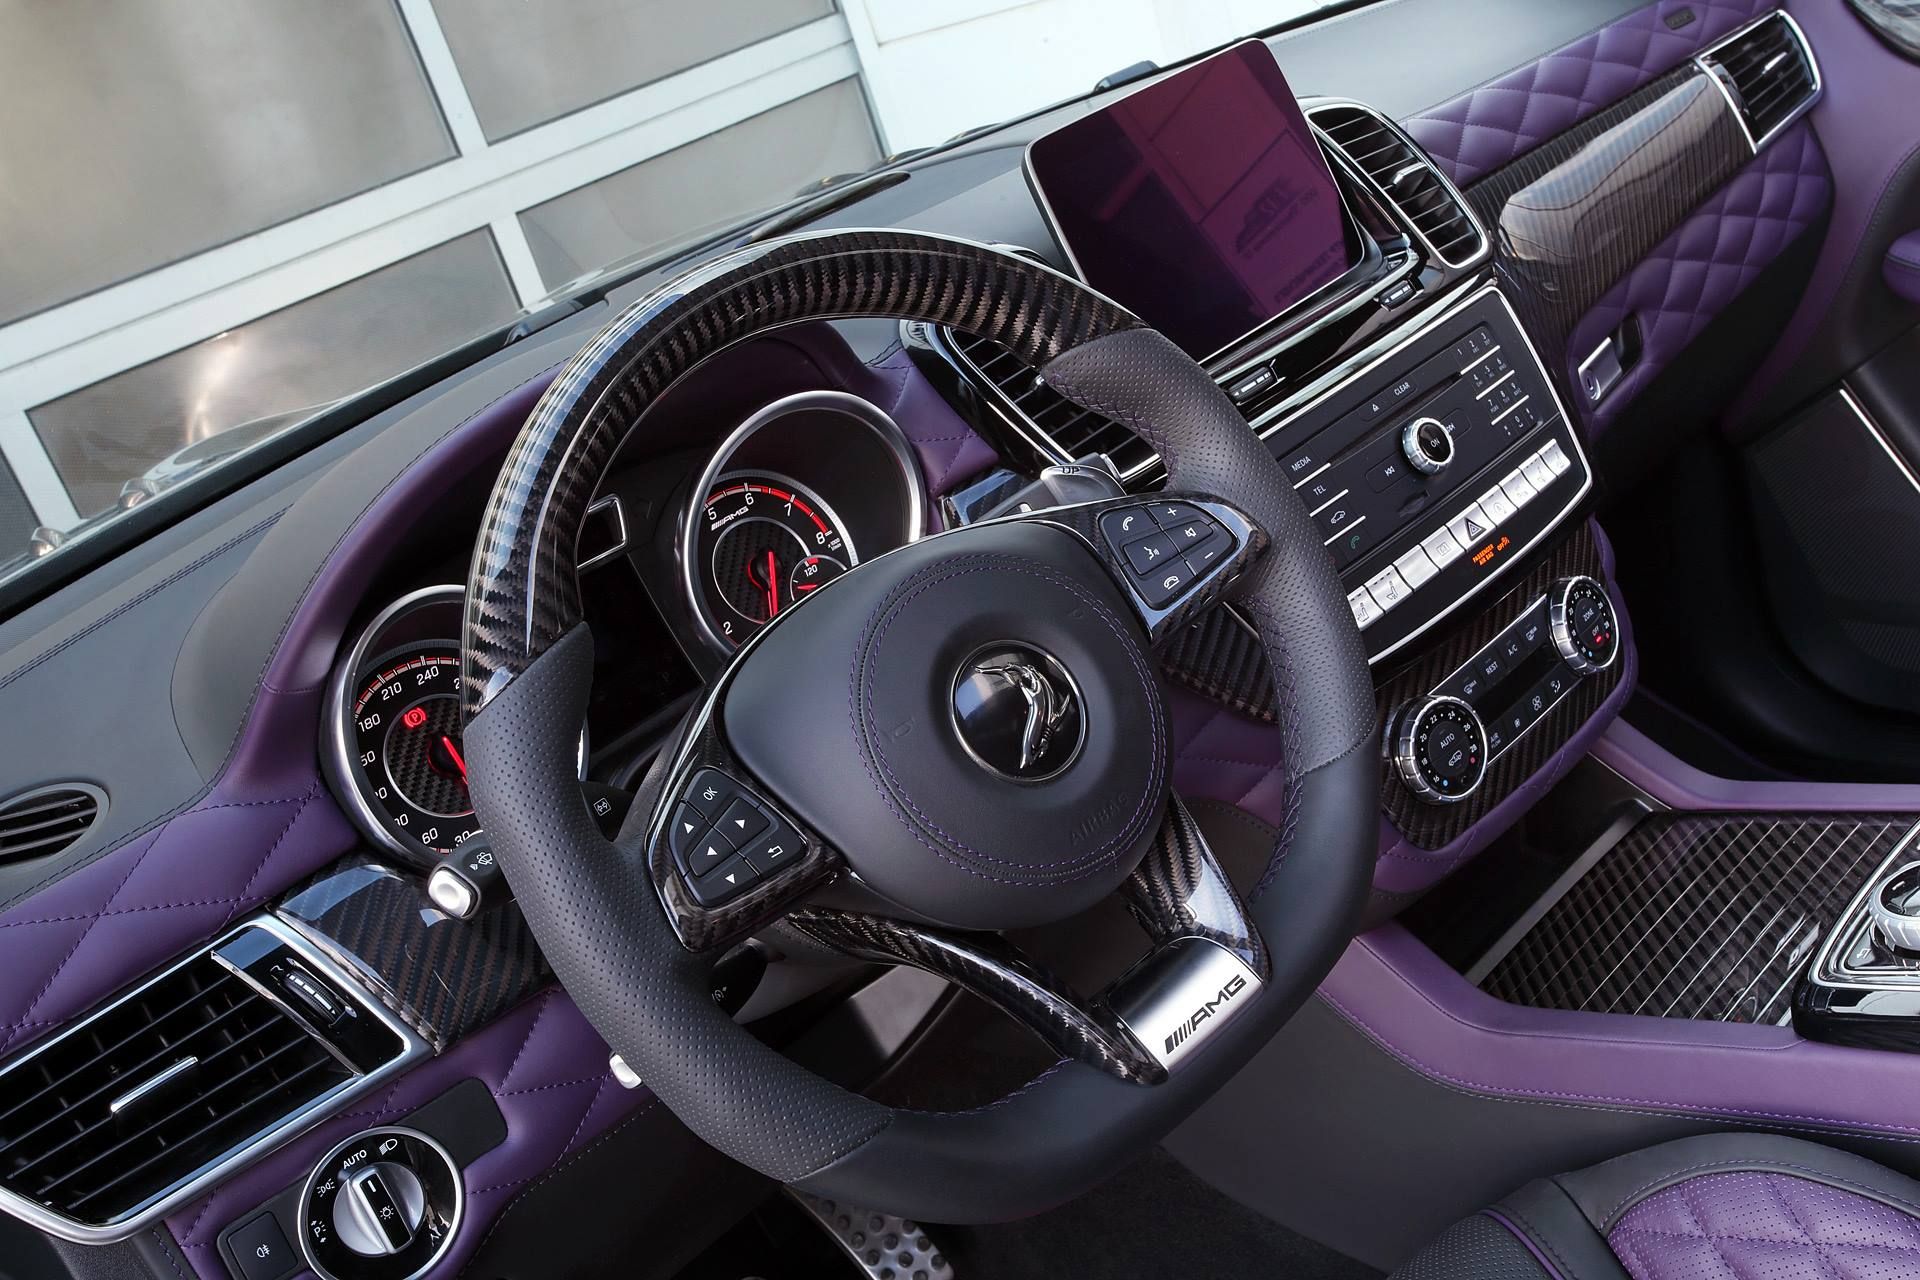 Carbon Mercedes Amg Gle 63 By Topcar Has Purple Leather